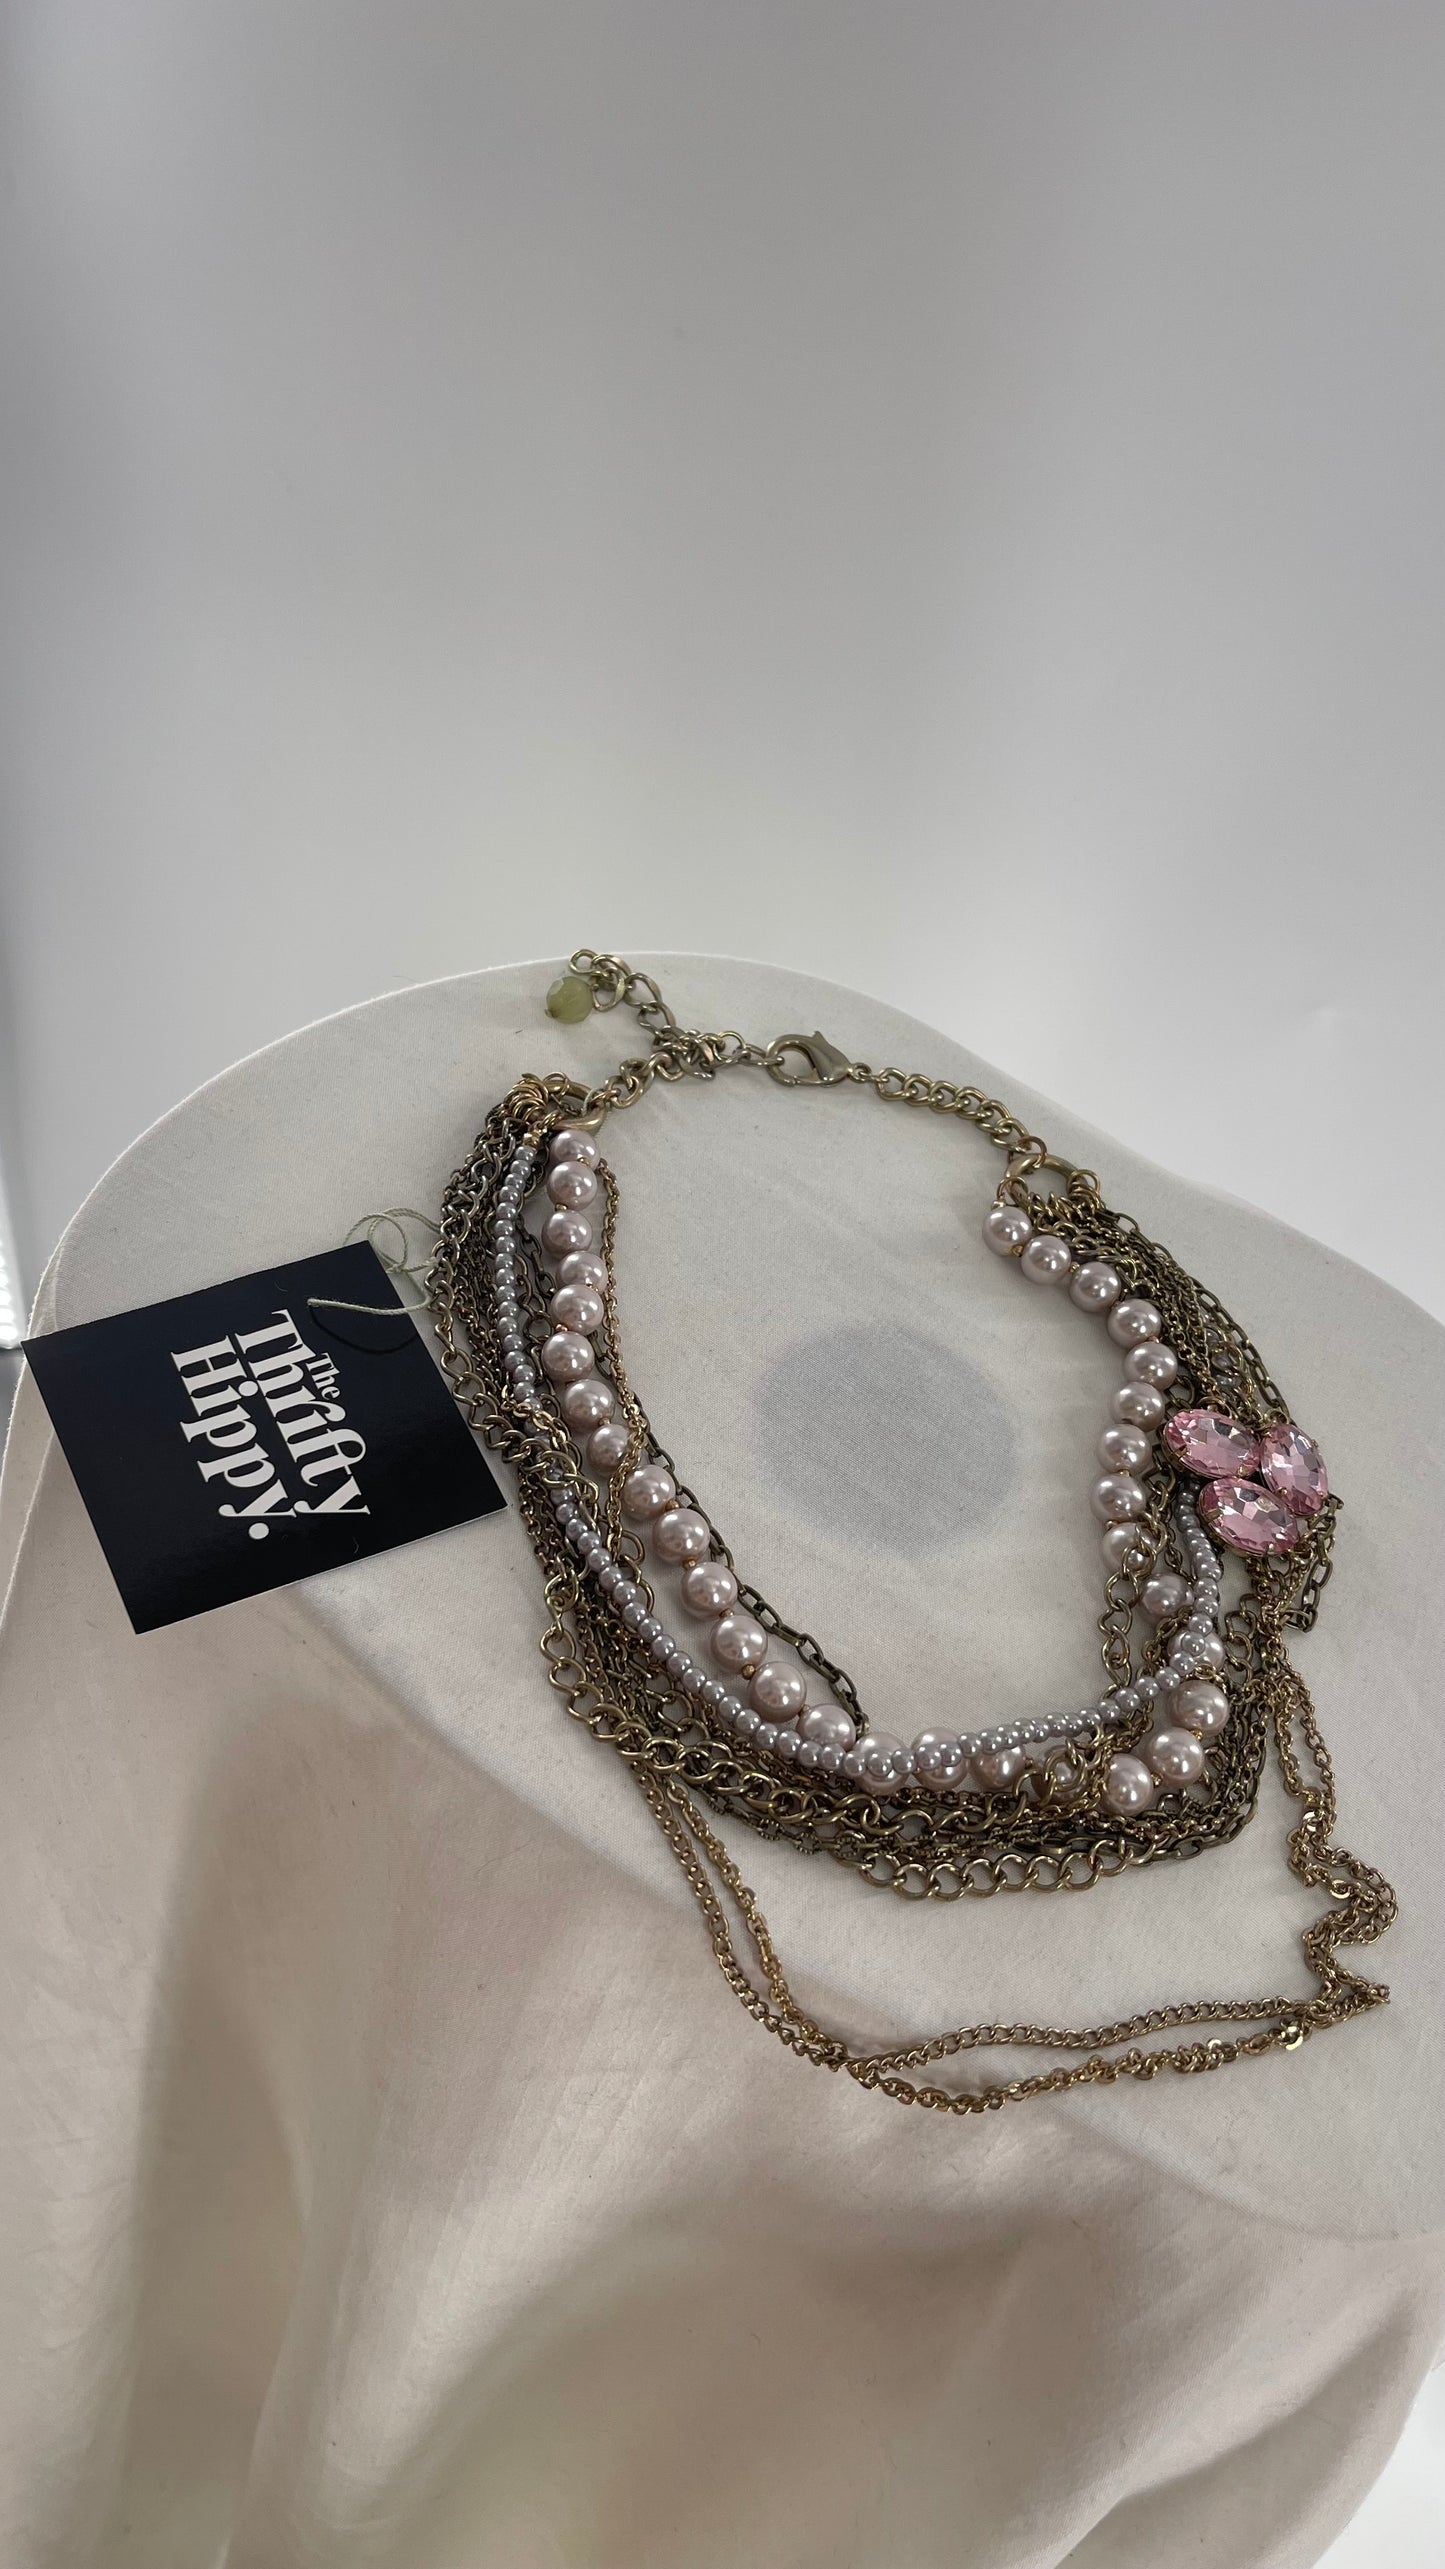 Anthropologie Multi Layered Chain and Pearls Choker Necklace